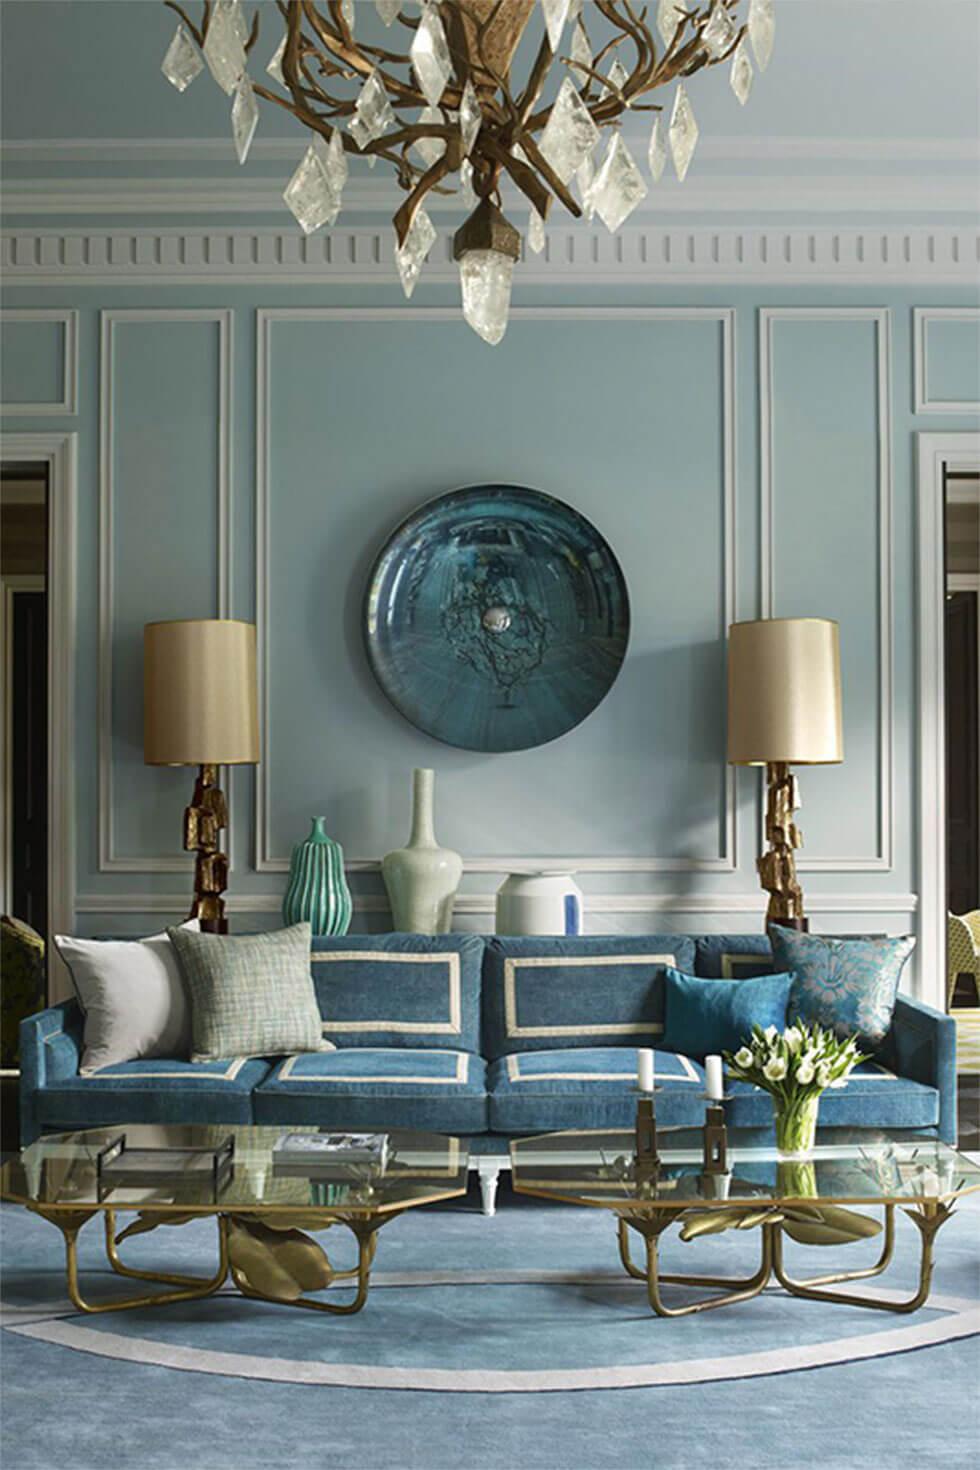 Light blue living room walls in a vintage-inspired classic home.